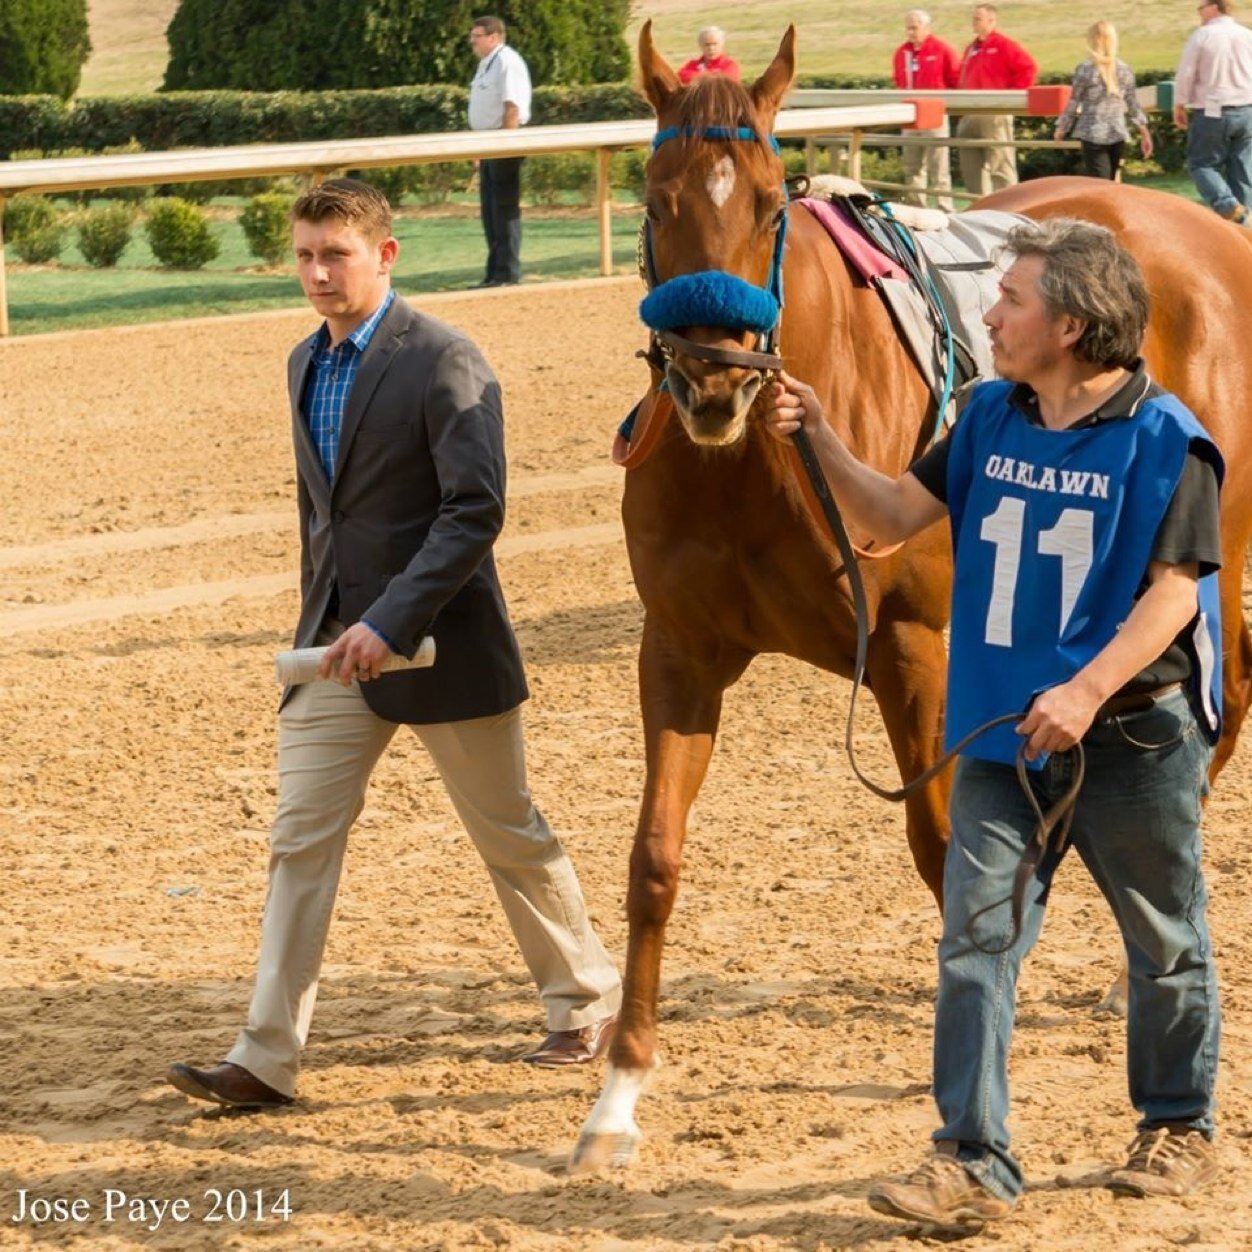 Thoroughbred racehorse trainer currently based at Prairie Meadows Race Track | Dedicated to the pursuit of excellence and the thrill of victory |